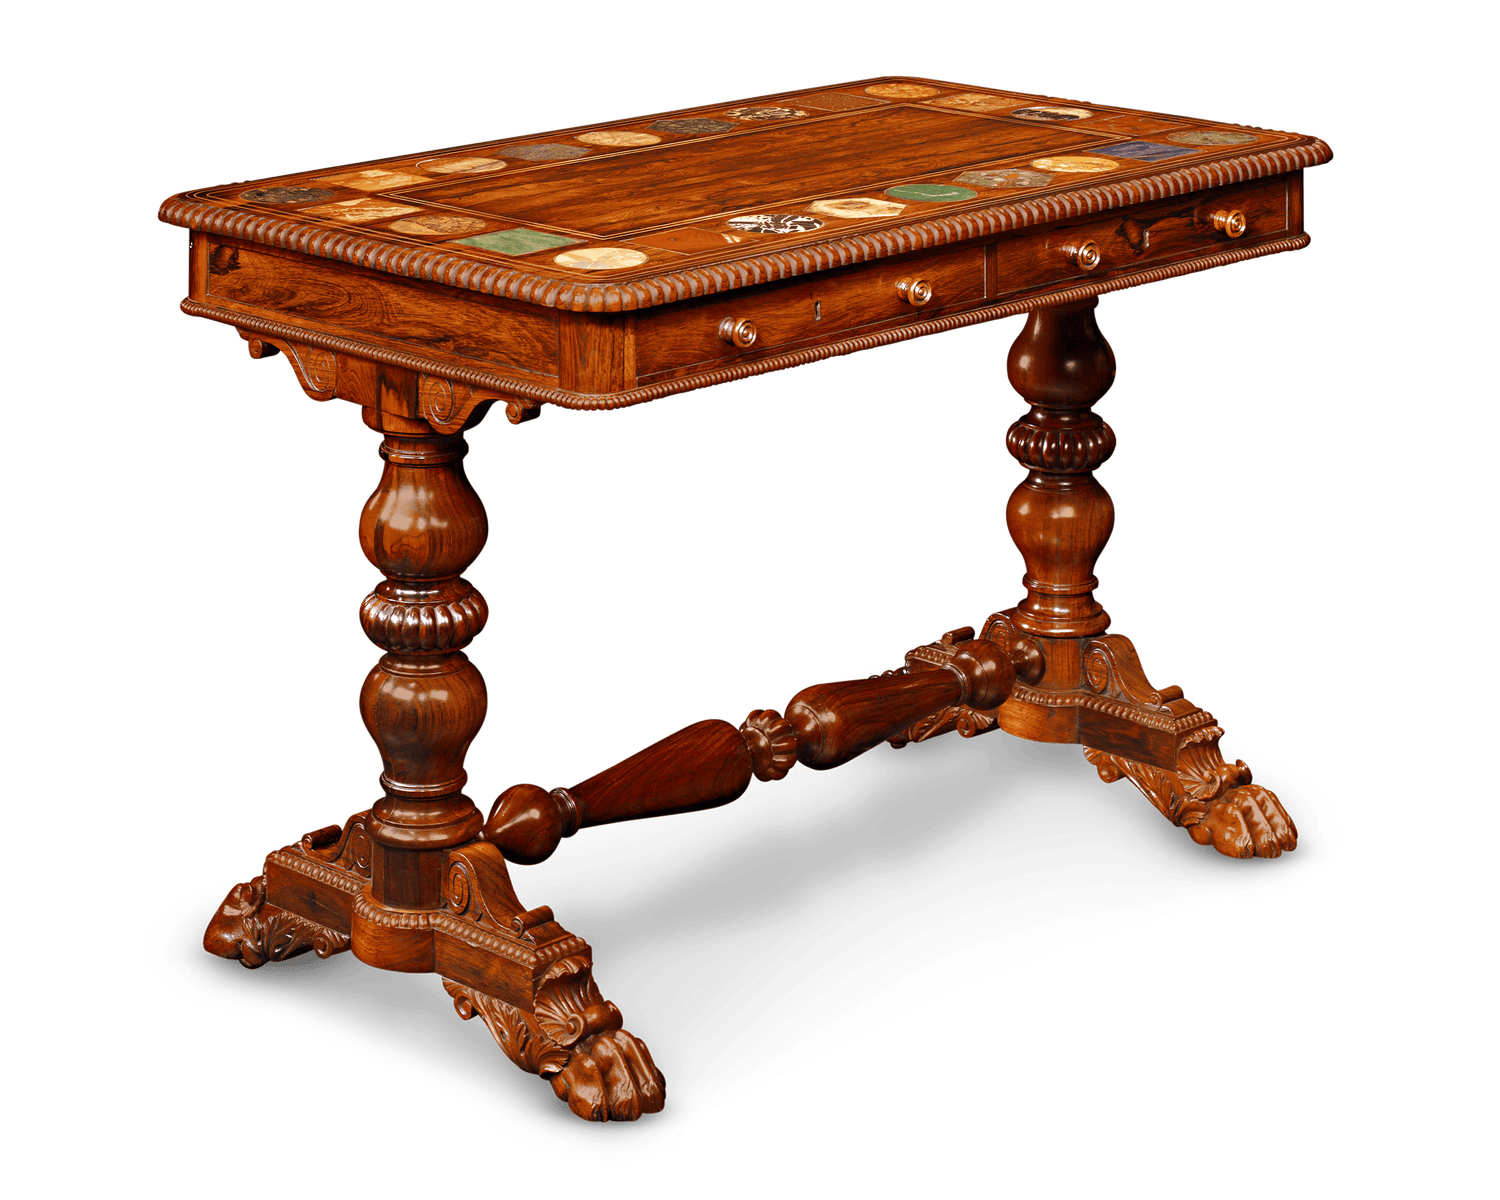 Hardstone and Rosewood Centre Table Attributed To Gillows